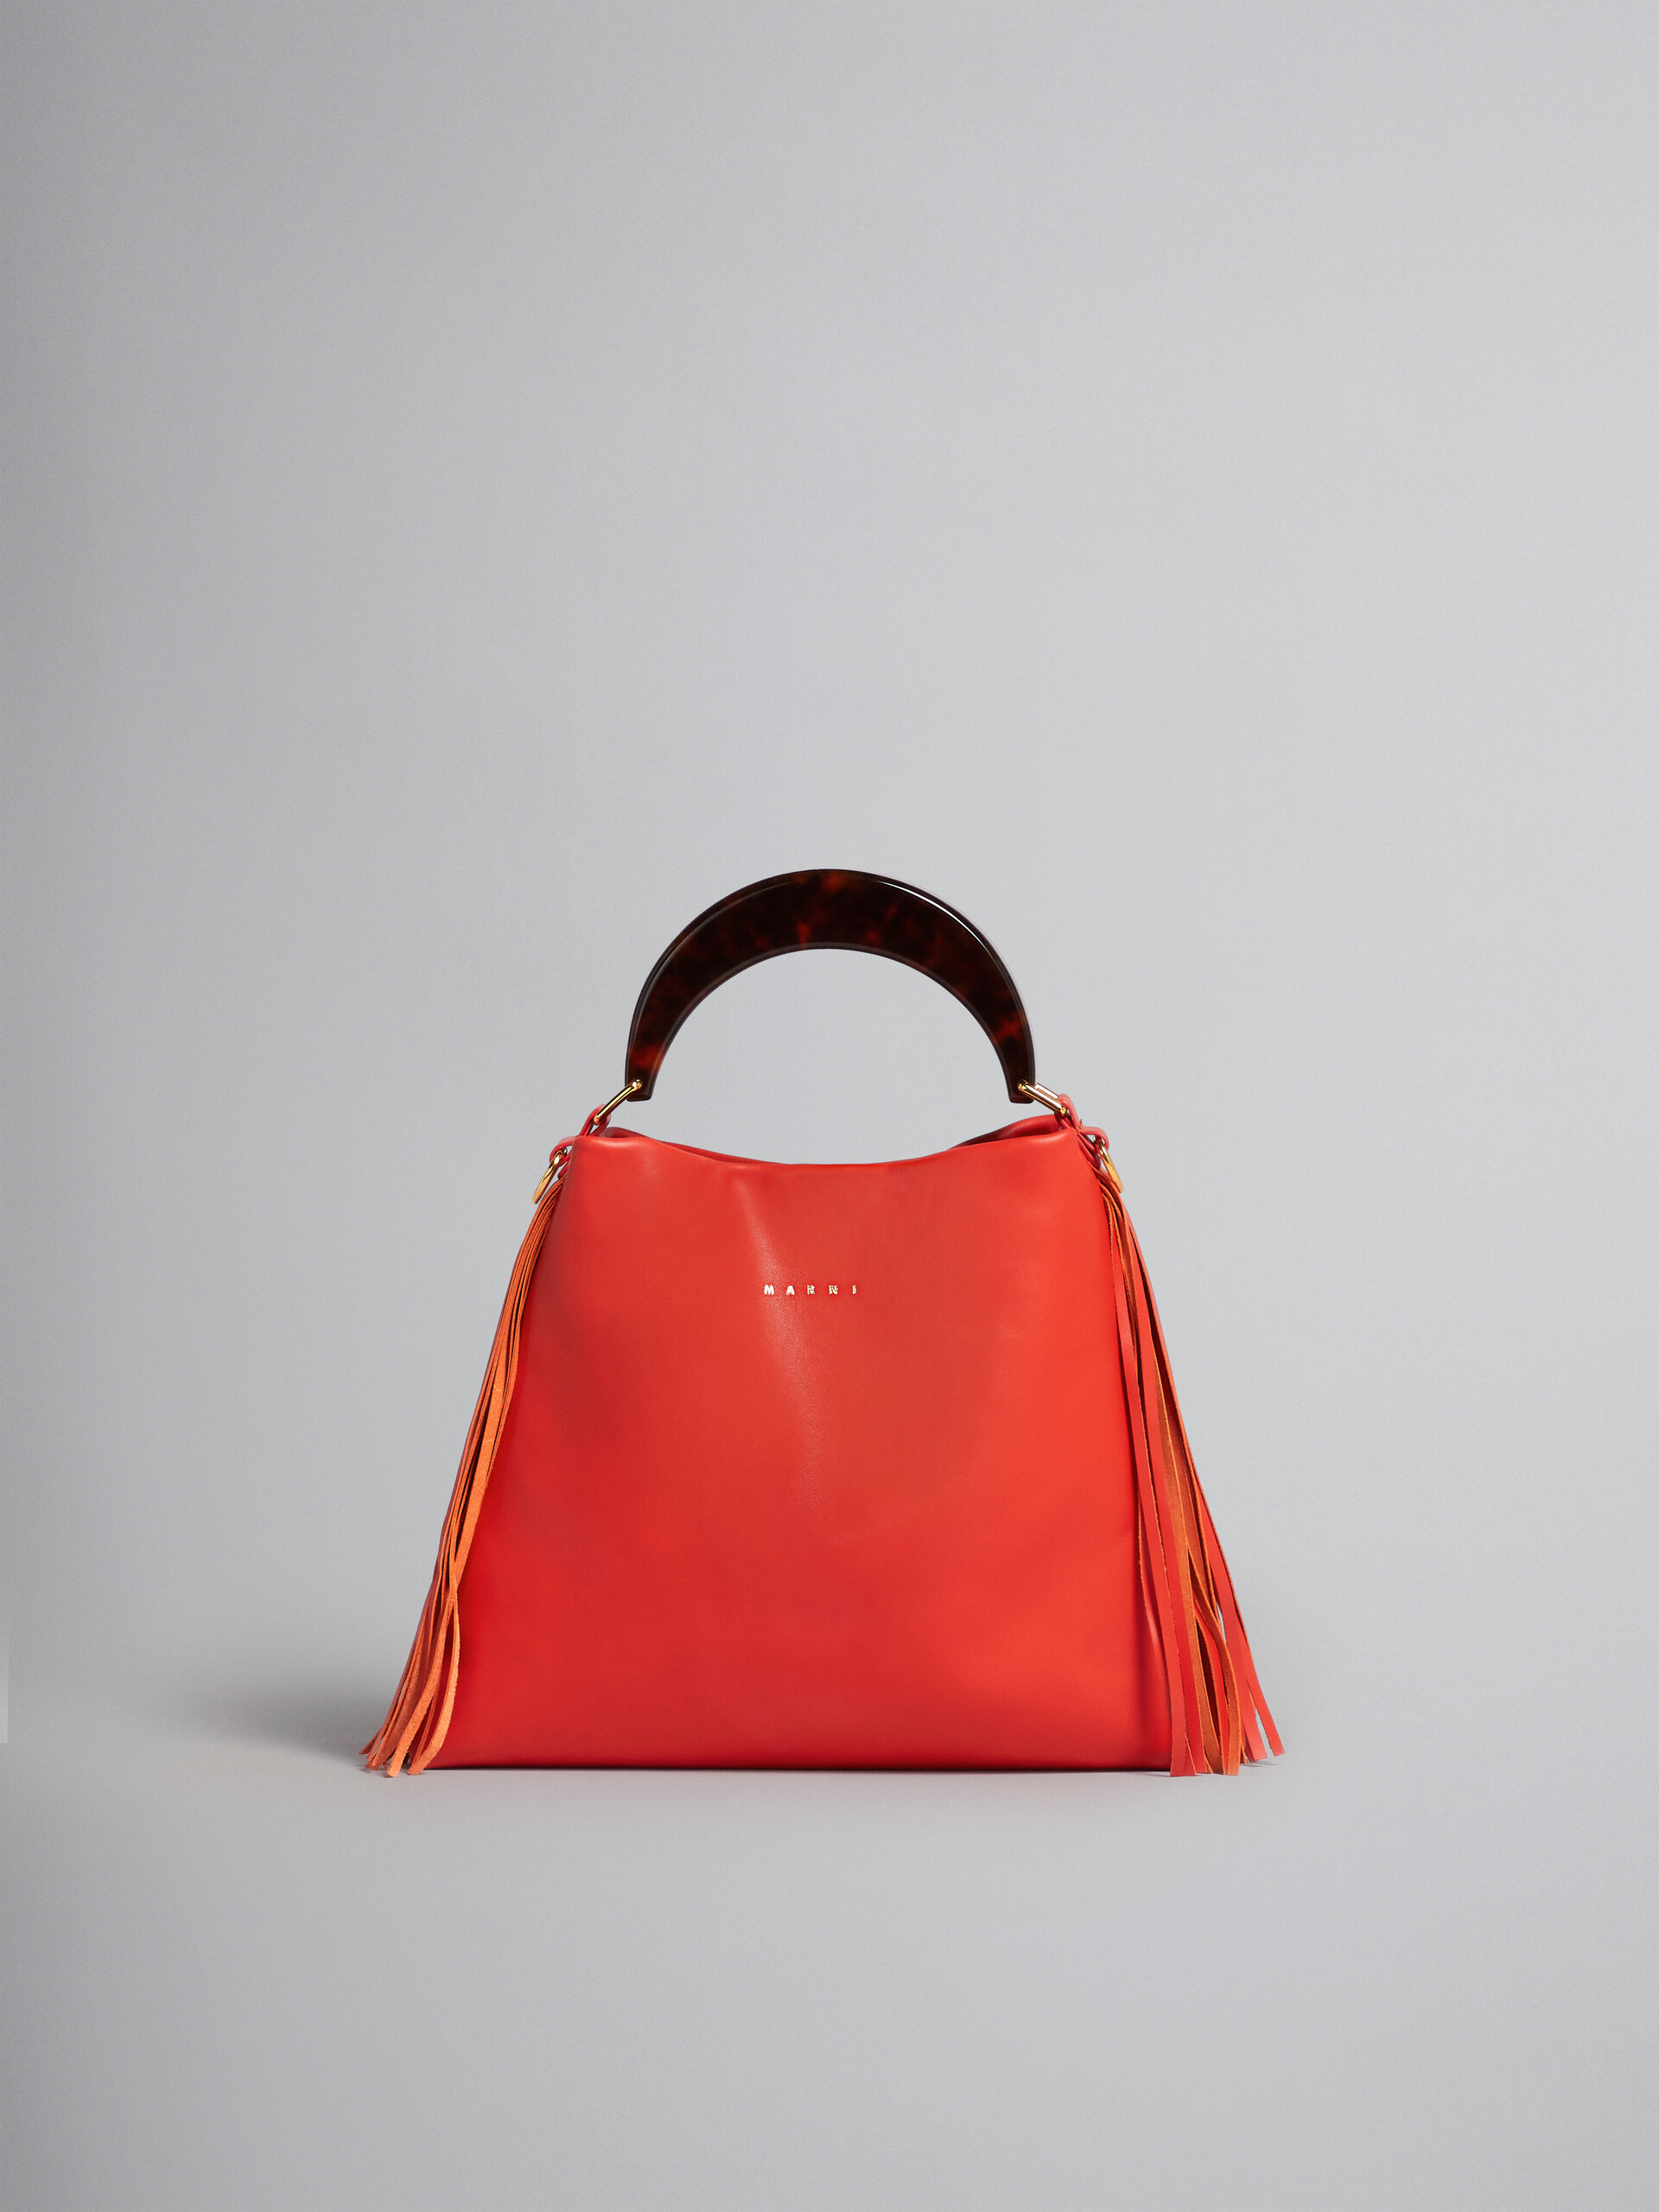 Venice Small Bag in orange leather with fringes - Shoulder Bags - Image 1